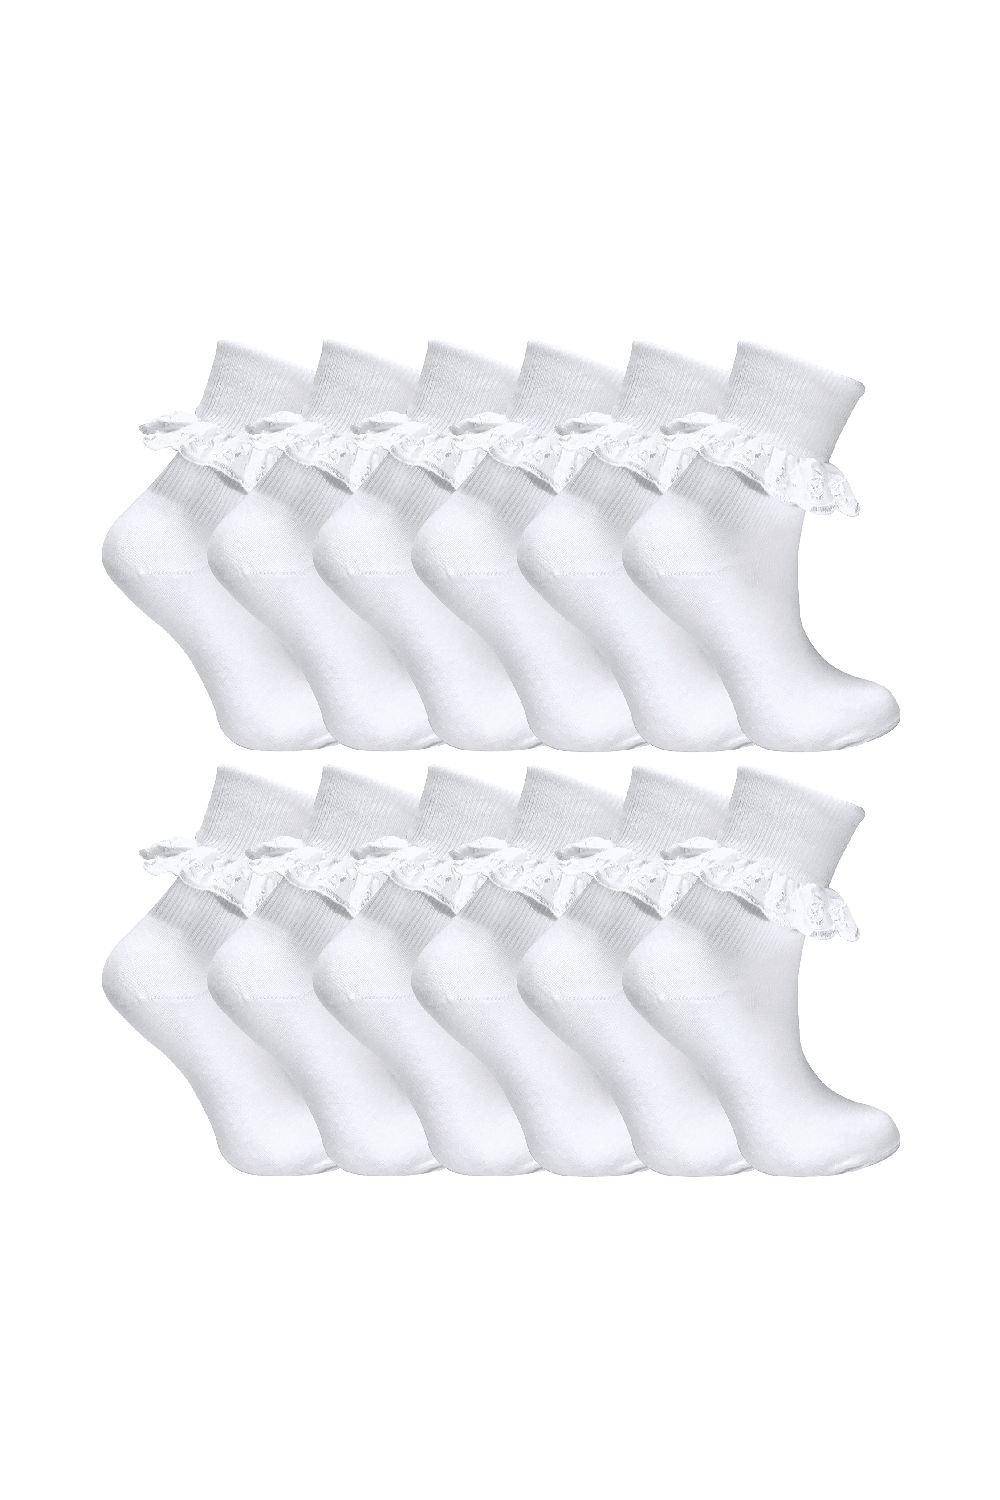 12 Pair White Frilly Lace Cute Cotton Rich School Socks